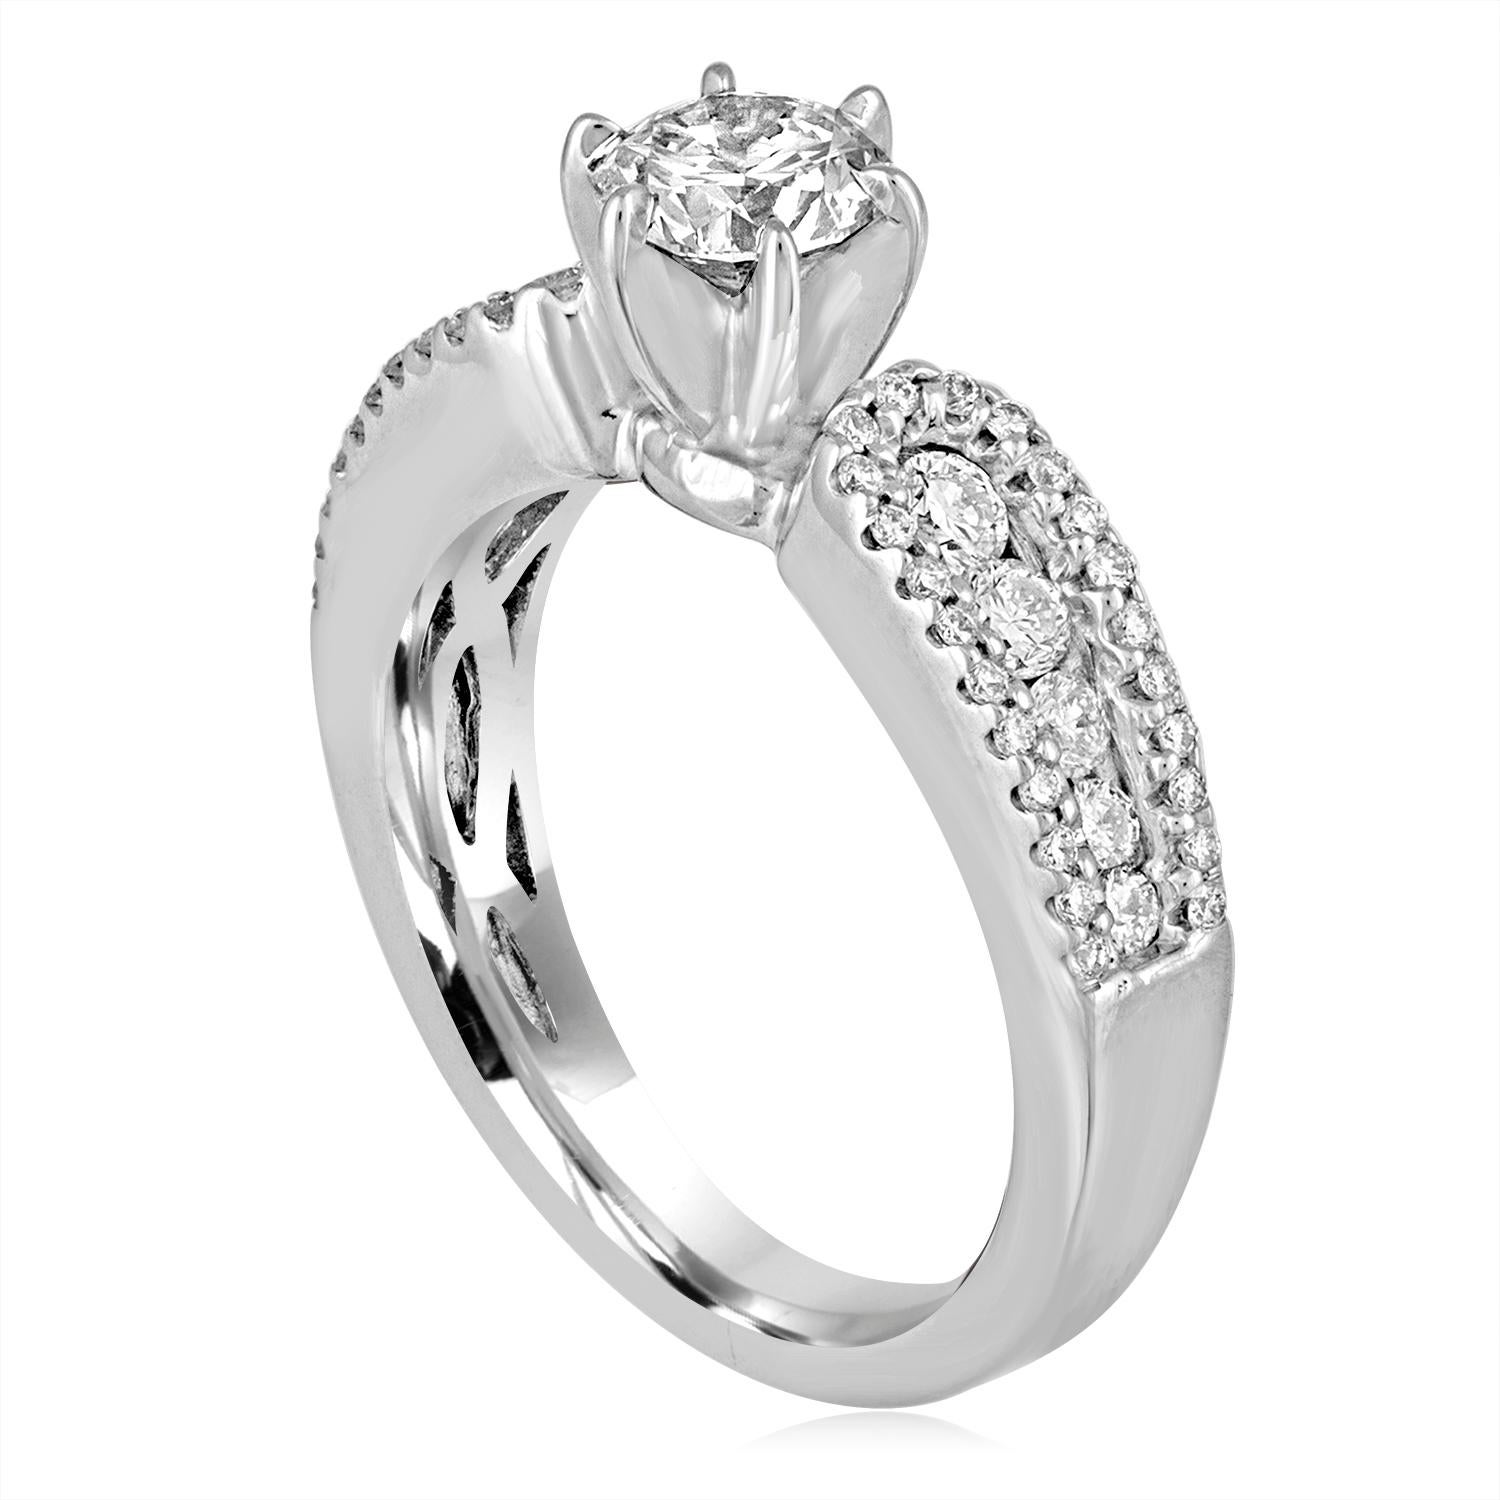 The ring is 14K White Gold
The center stone is a Round 0.51 Carats E VS2 GIA Certified
The setting has 0.70 Carats in White Diamonds G/H SI
The ring is a size 4.5, sizable.
The ring weighs 4.4 grams.